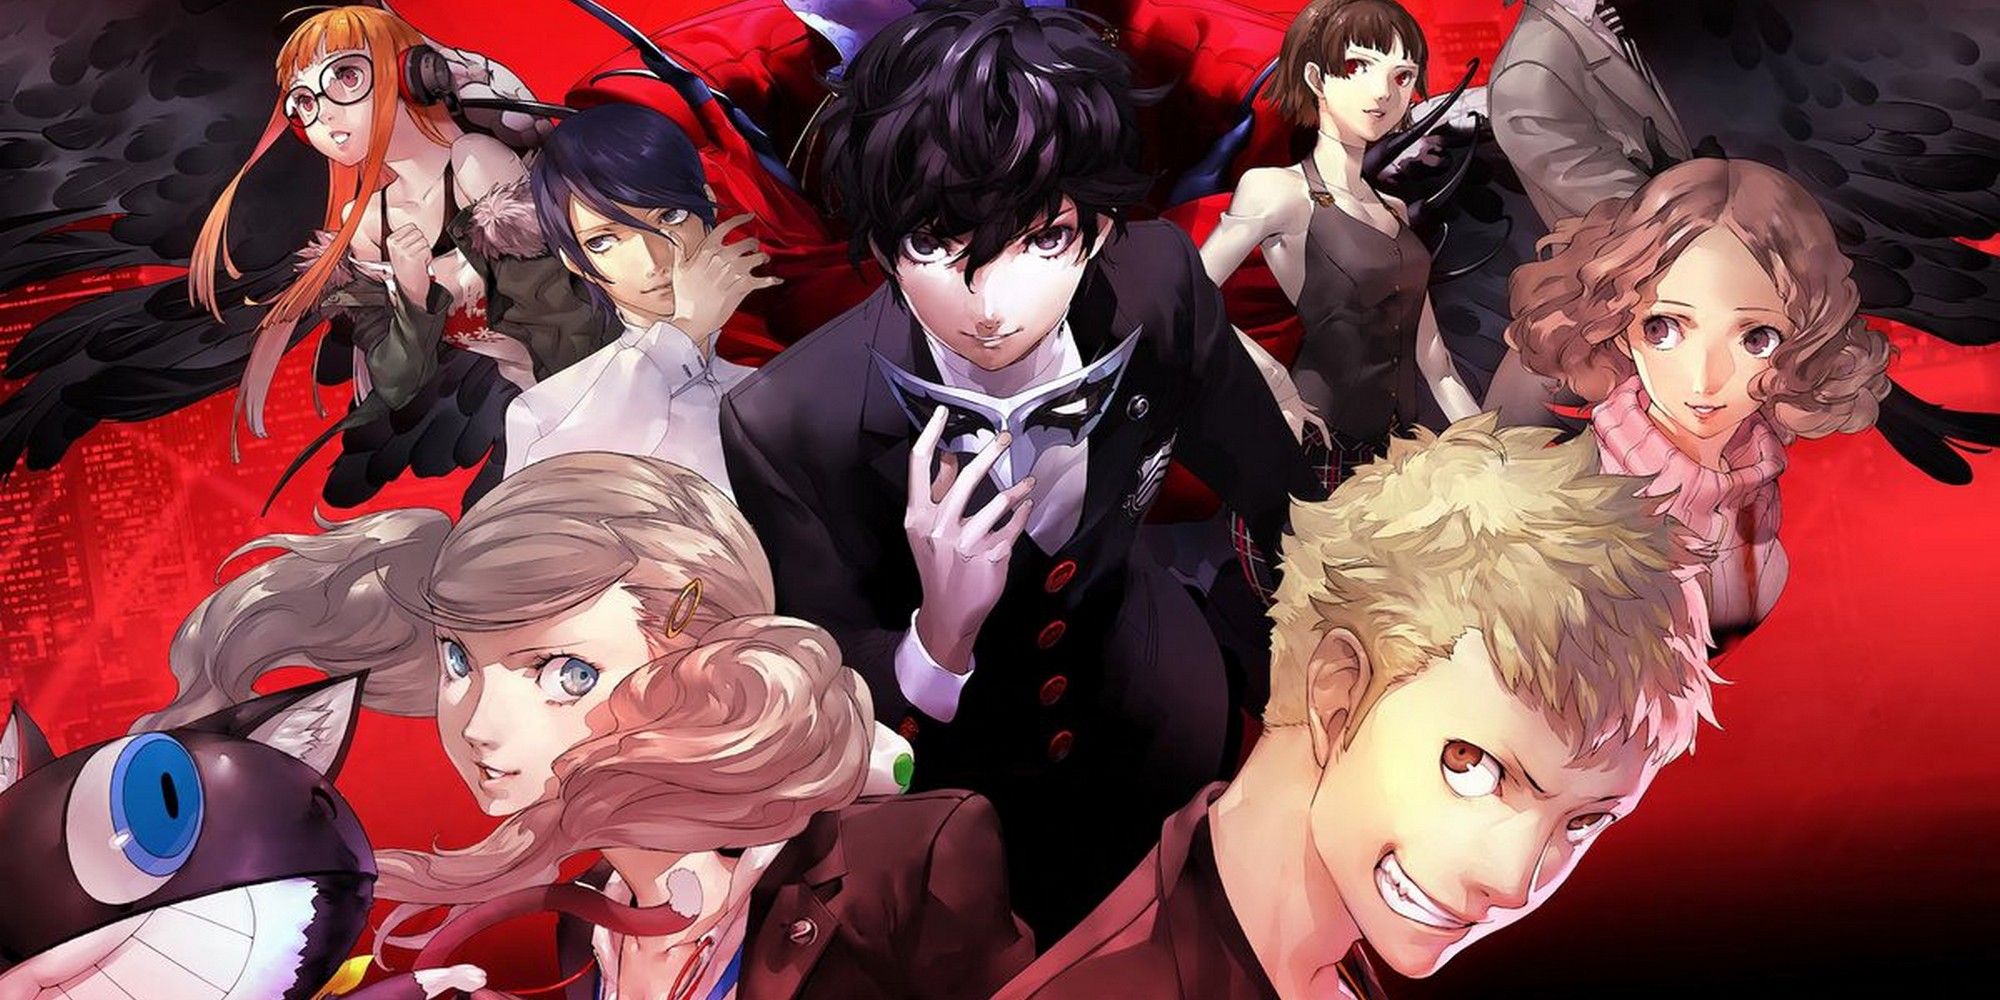 feature persona 5 phantom thieves group shot red background